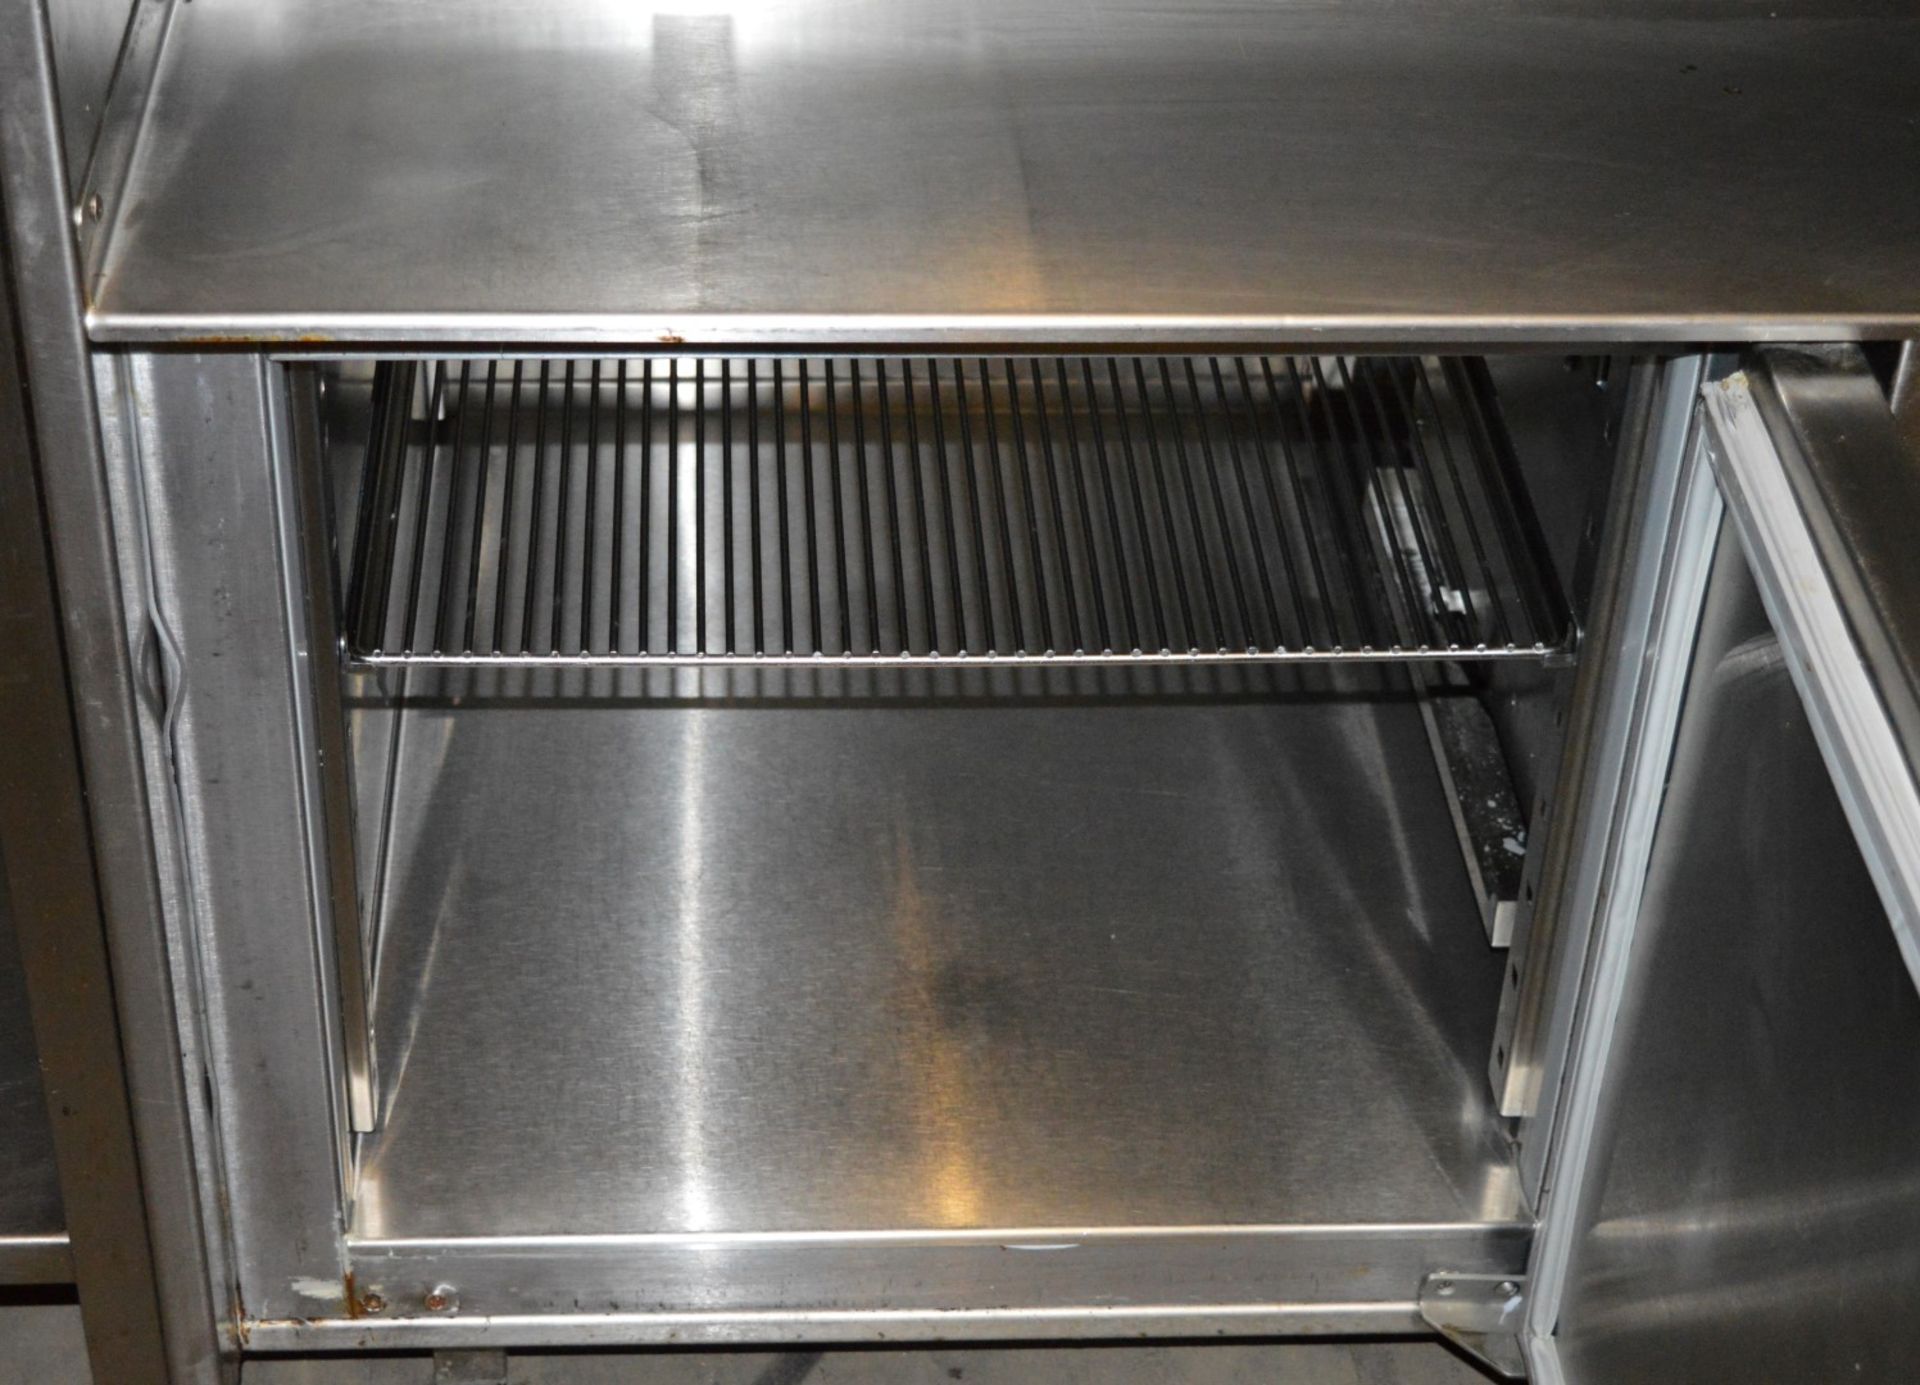 1 x Franke Stainless Steel Prep Table With Single Door Chiller, Fan Cooled Saladette, Wells SS206 - Image 8 of 12